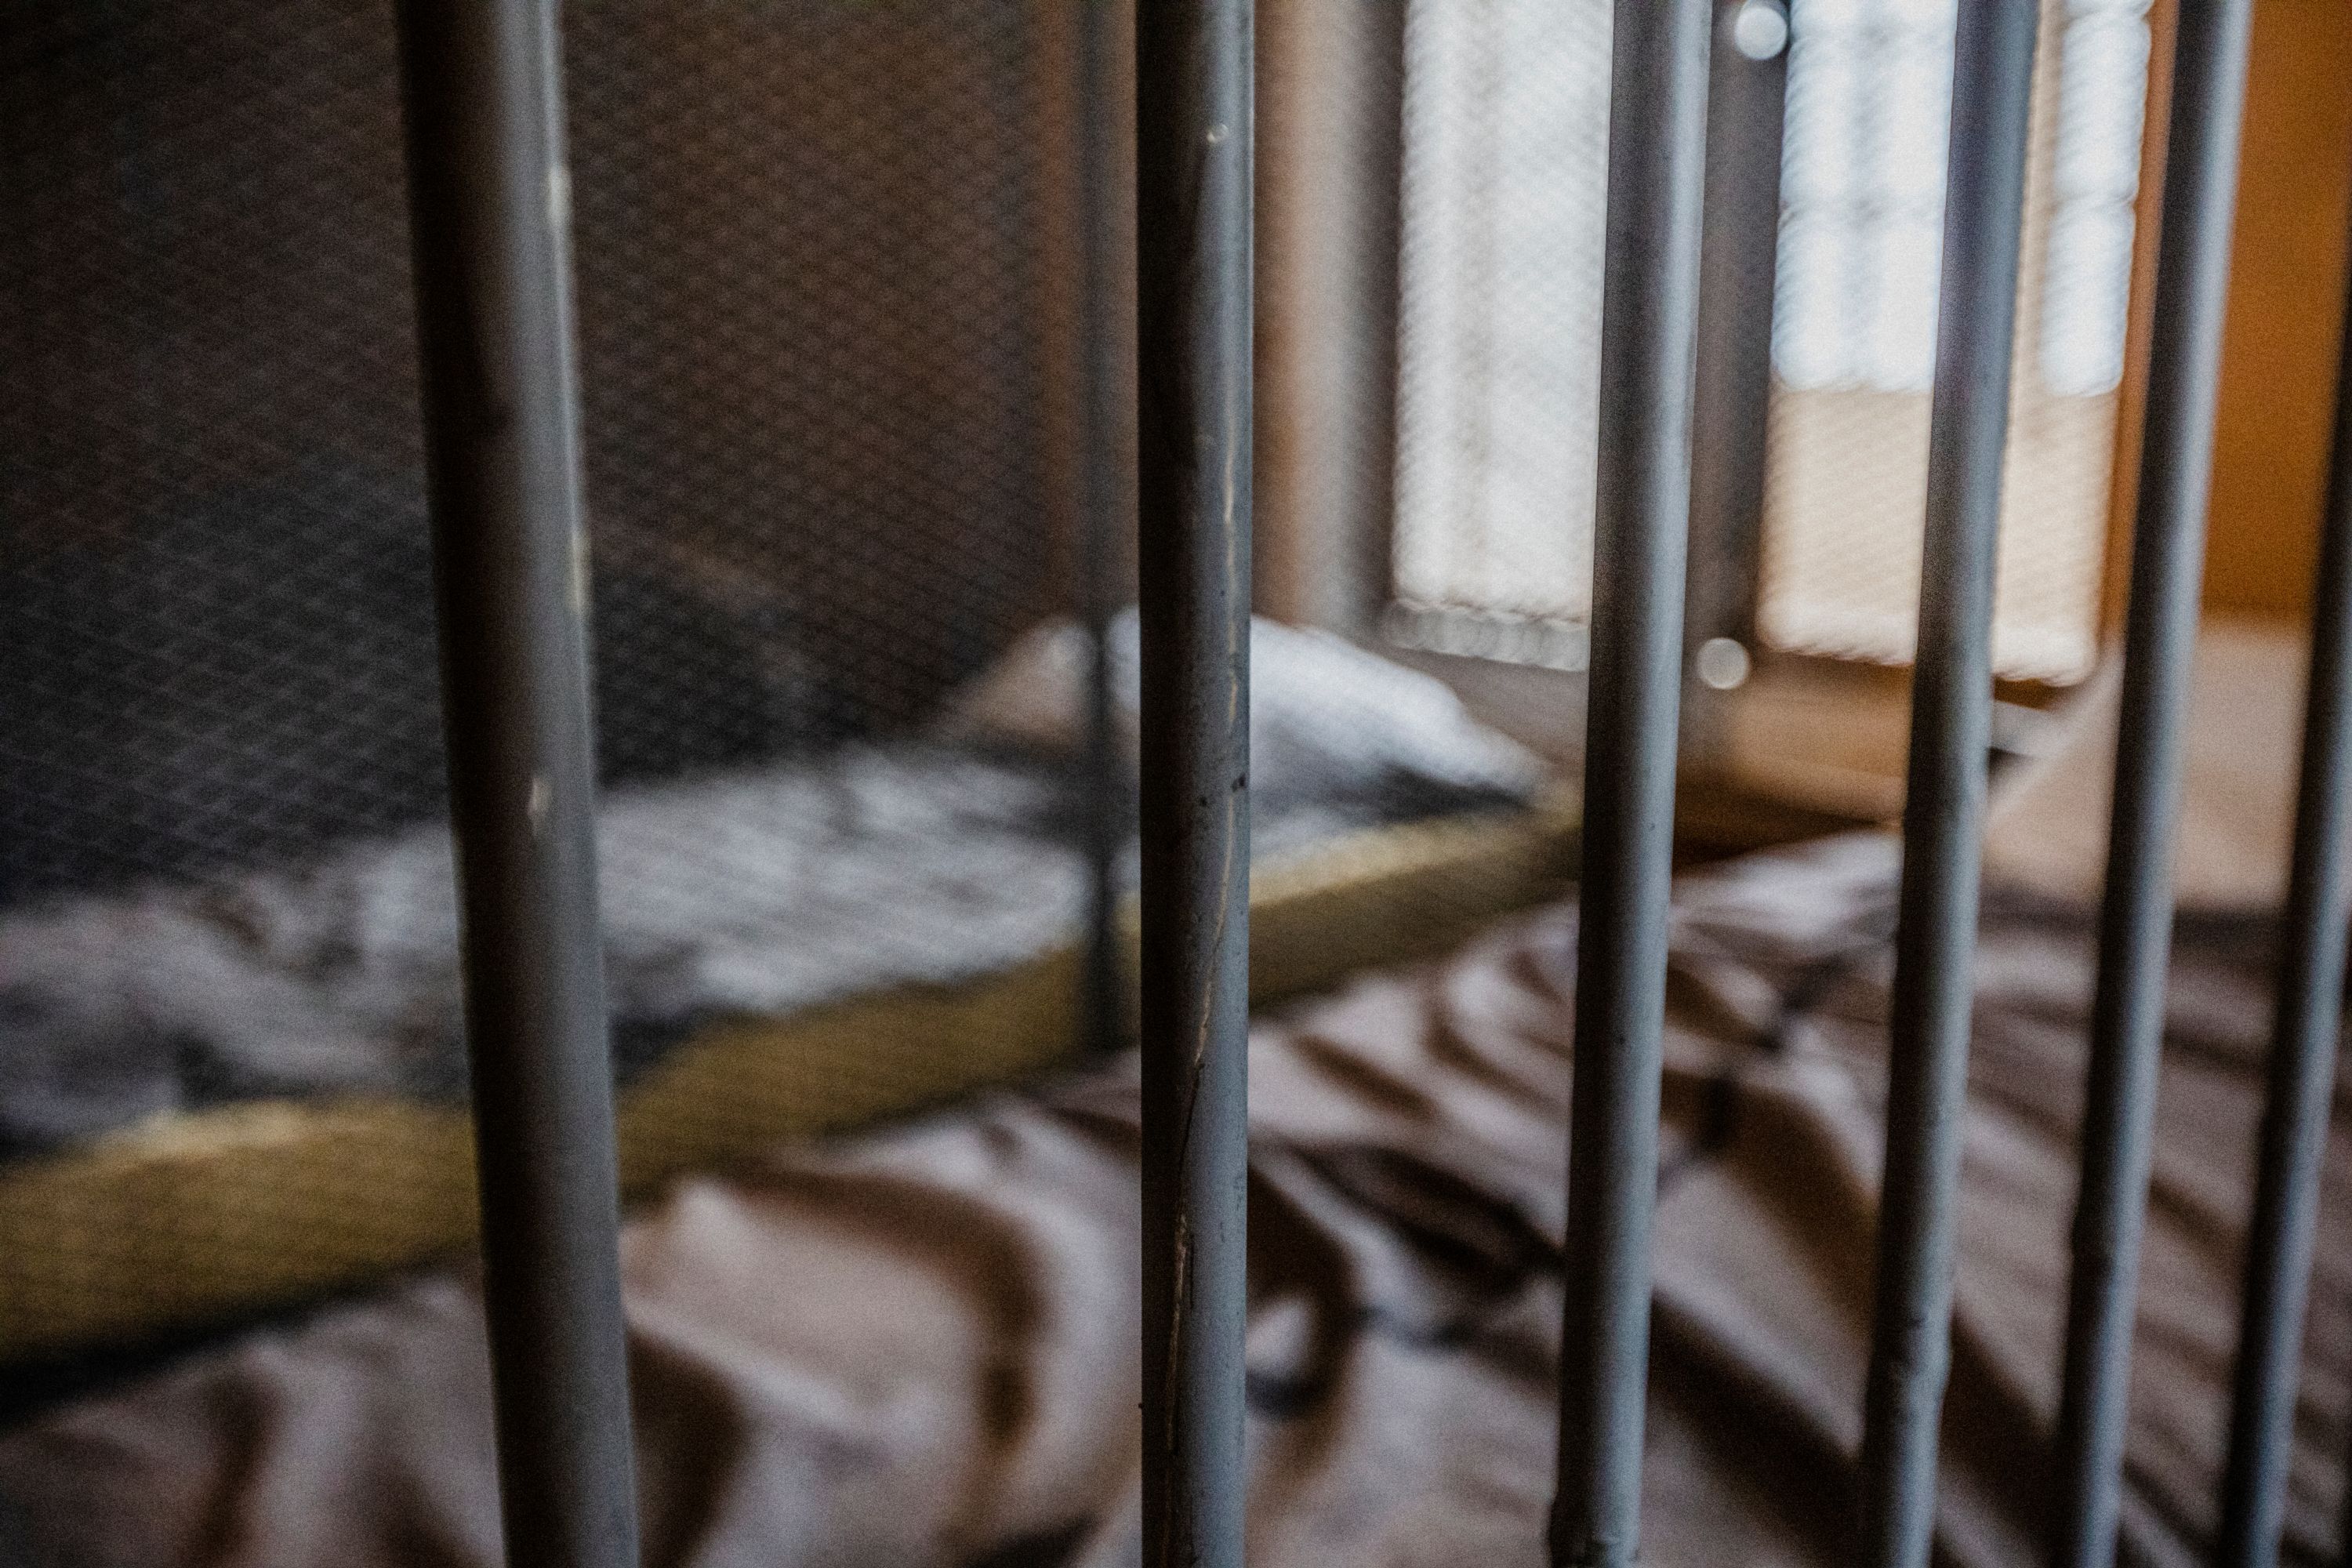 image of a prison cell 